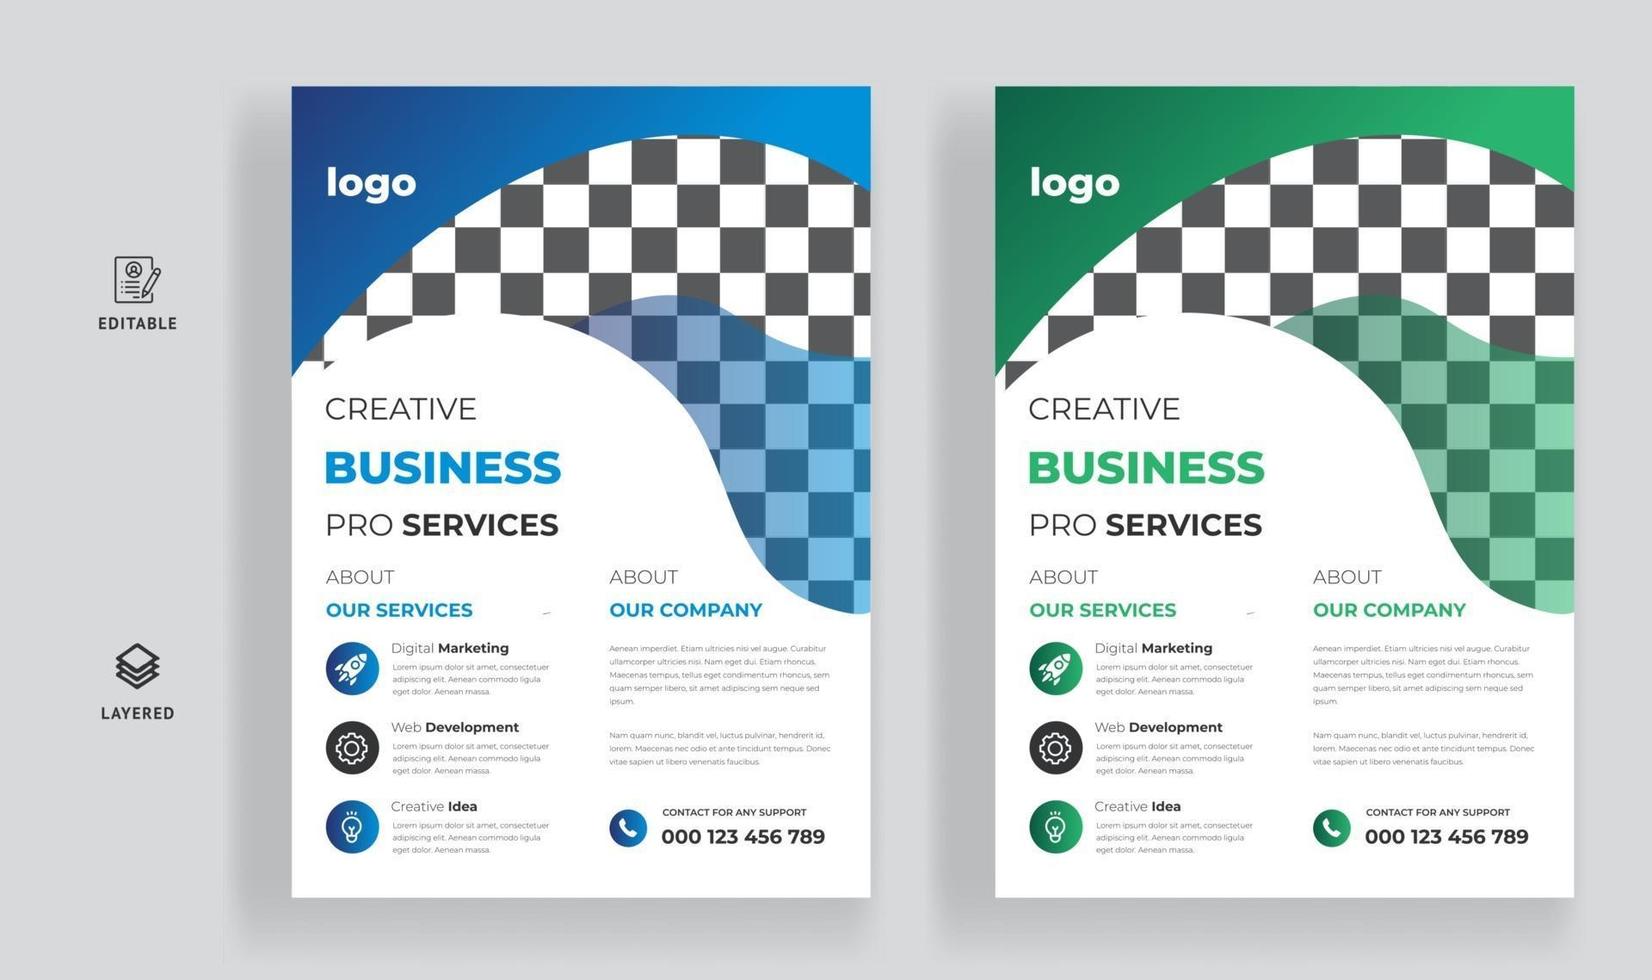 Digital marketing agency flyer design and brochure cover template vector